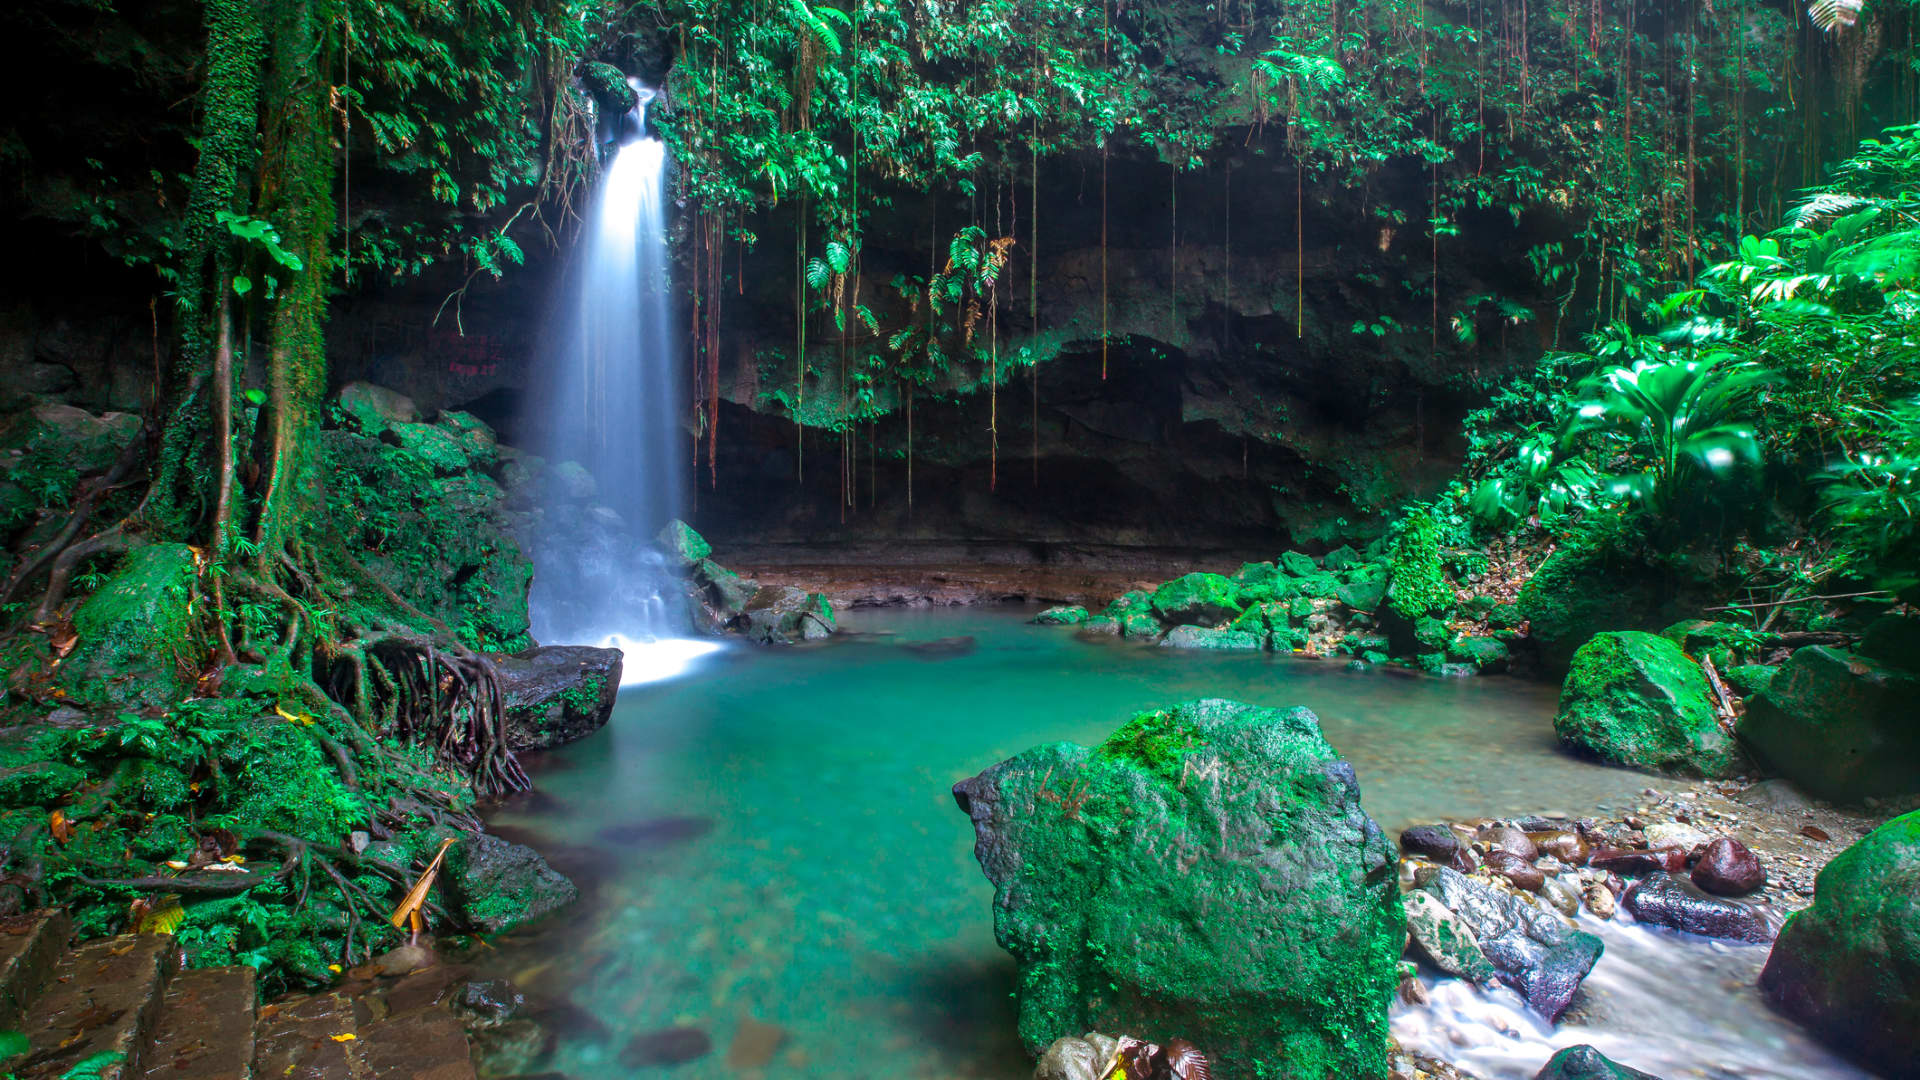 The 275-square-mile island nation of Dominica allows travelers from high-risk countries to visit places like Trafalgar Falls and the Emerald Pool (shown here).